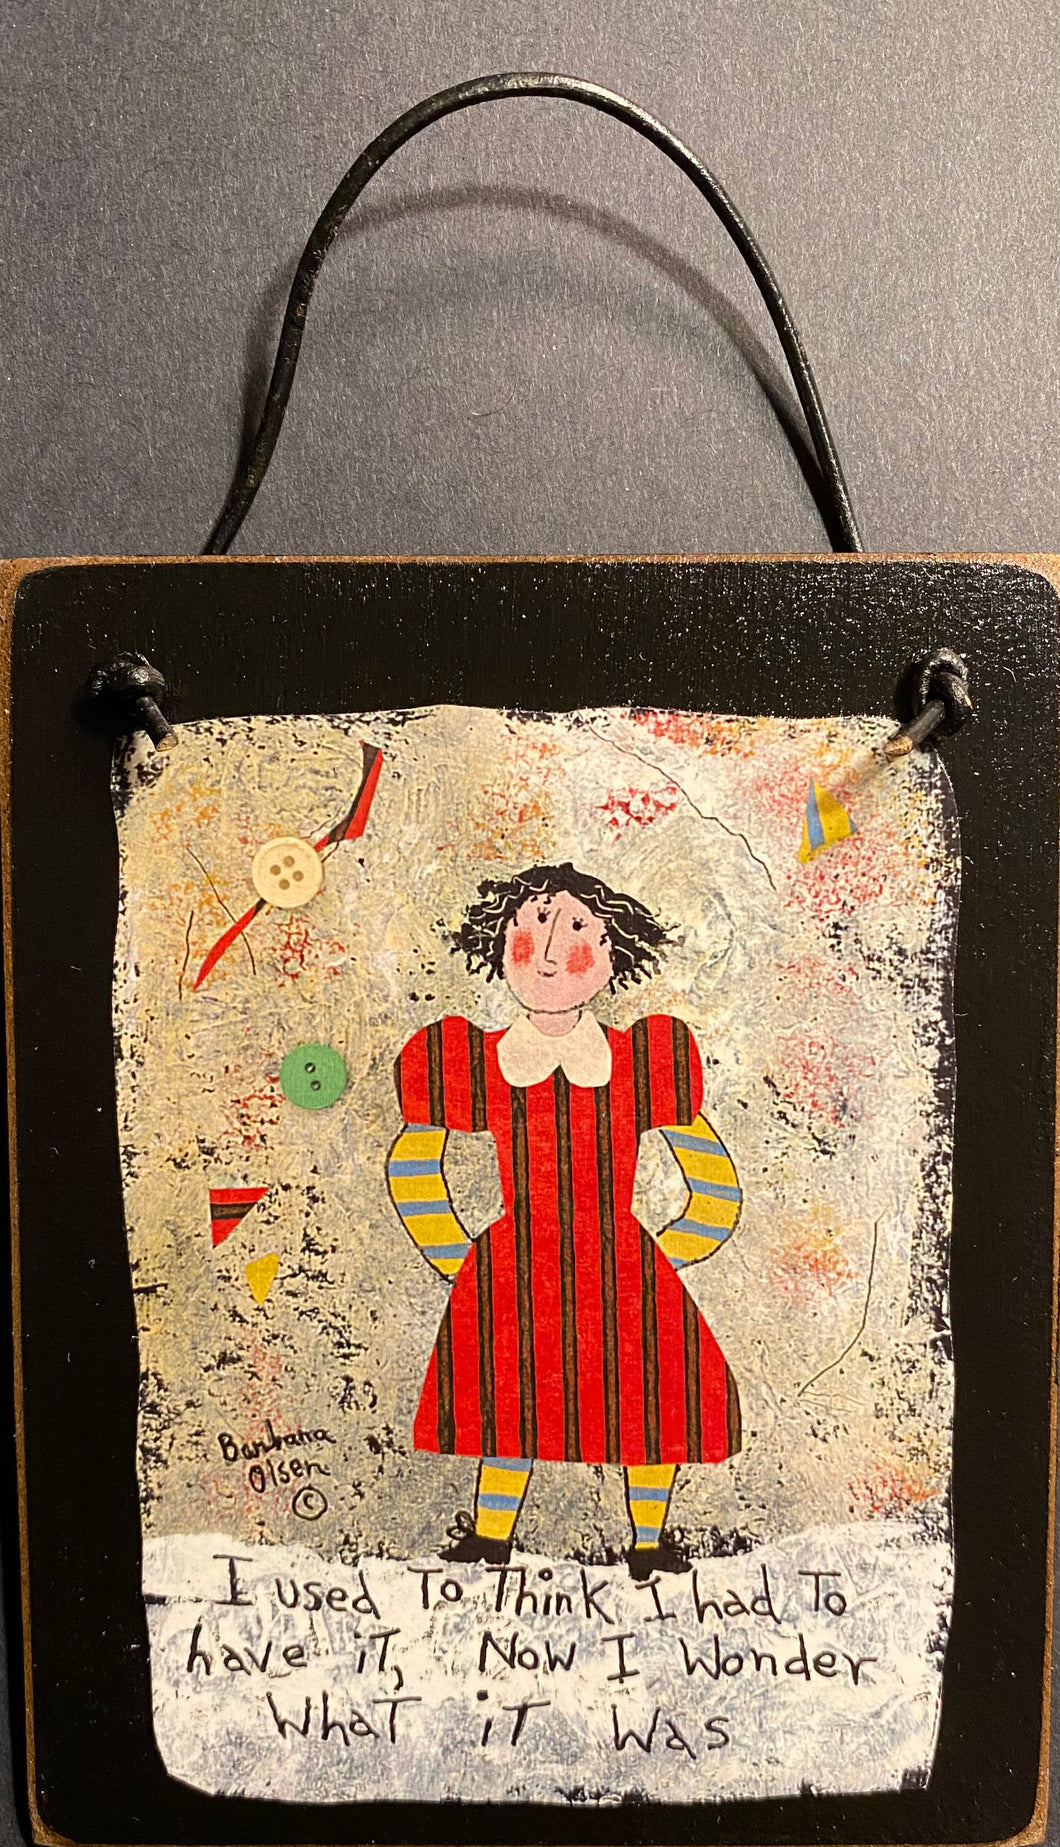 I Used To Think I Had To Have It - Hanging Plaque - Barbara Olsen